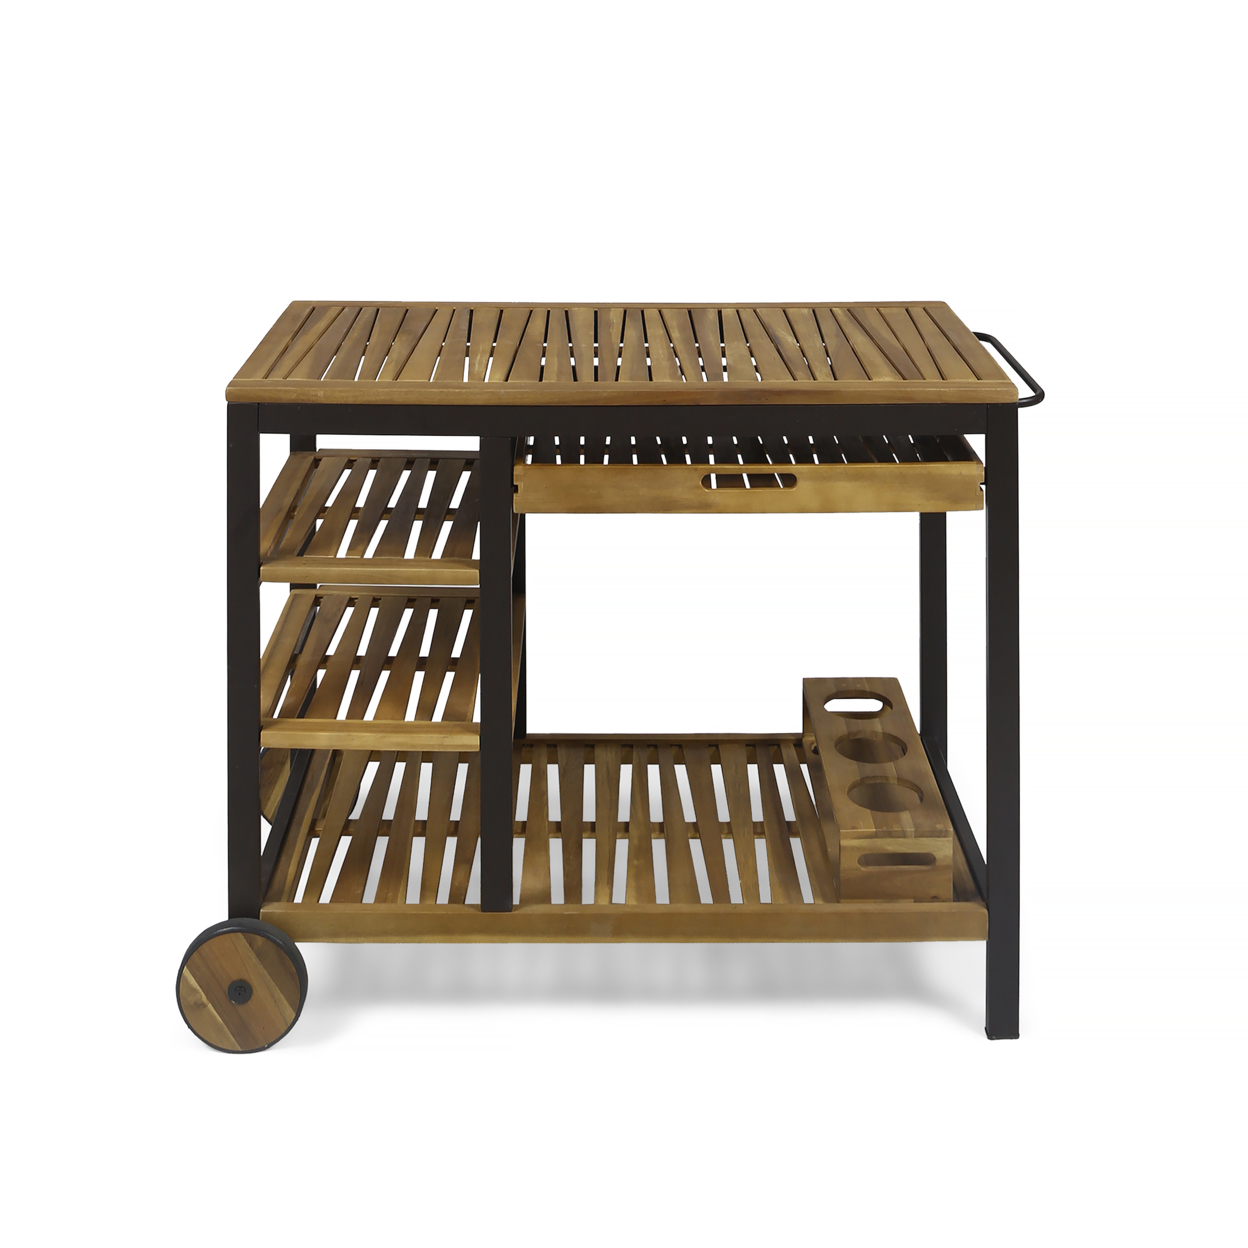 Ishtar Outdoor Acacia Wood Bar Cart With Reversible Drawers And Wine Bottle Holders